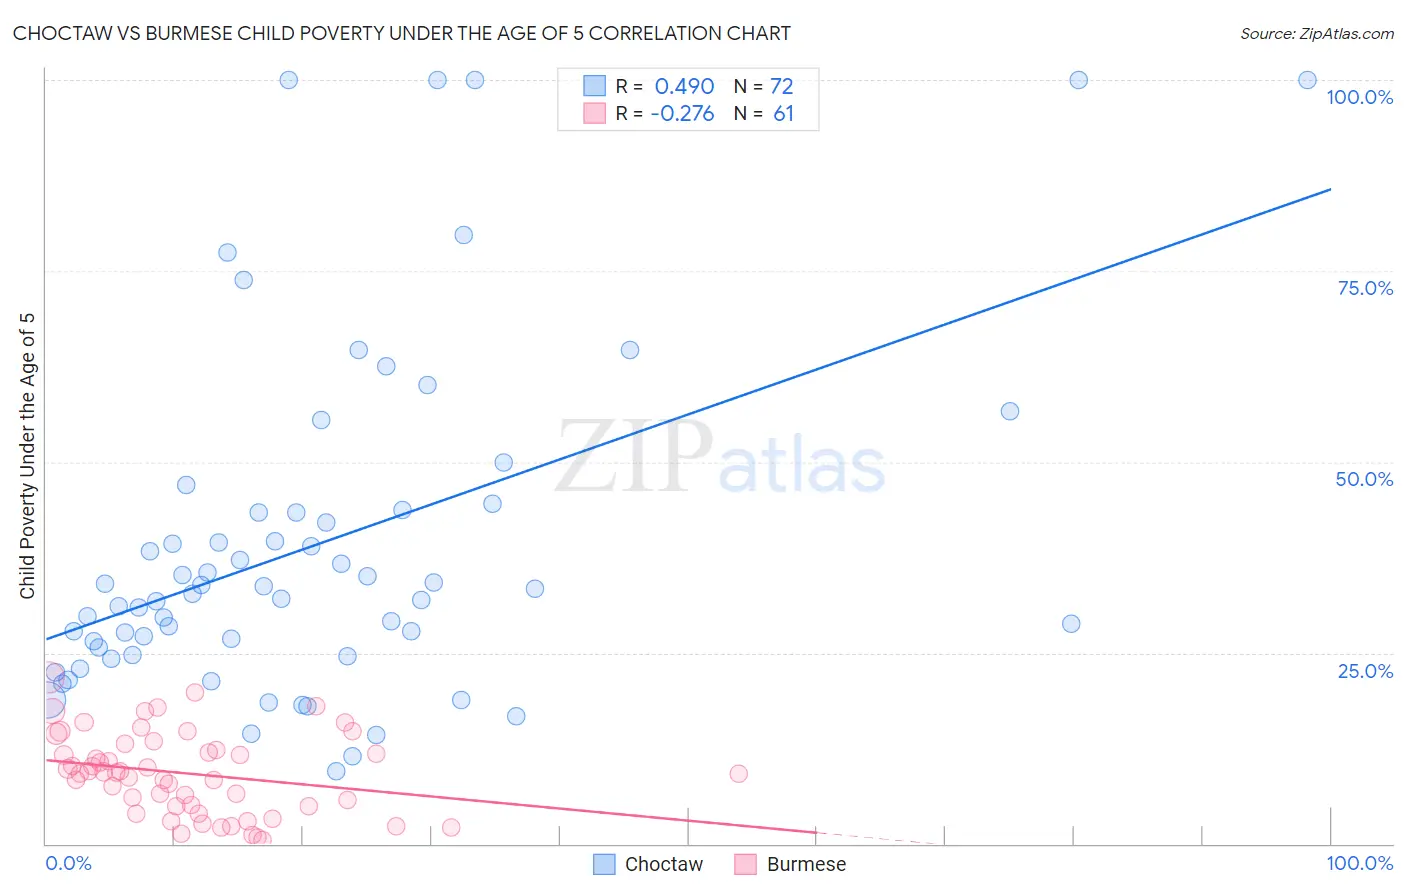 Choctaw vs Burmese Child Poverty Under the Age of 5